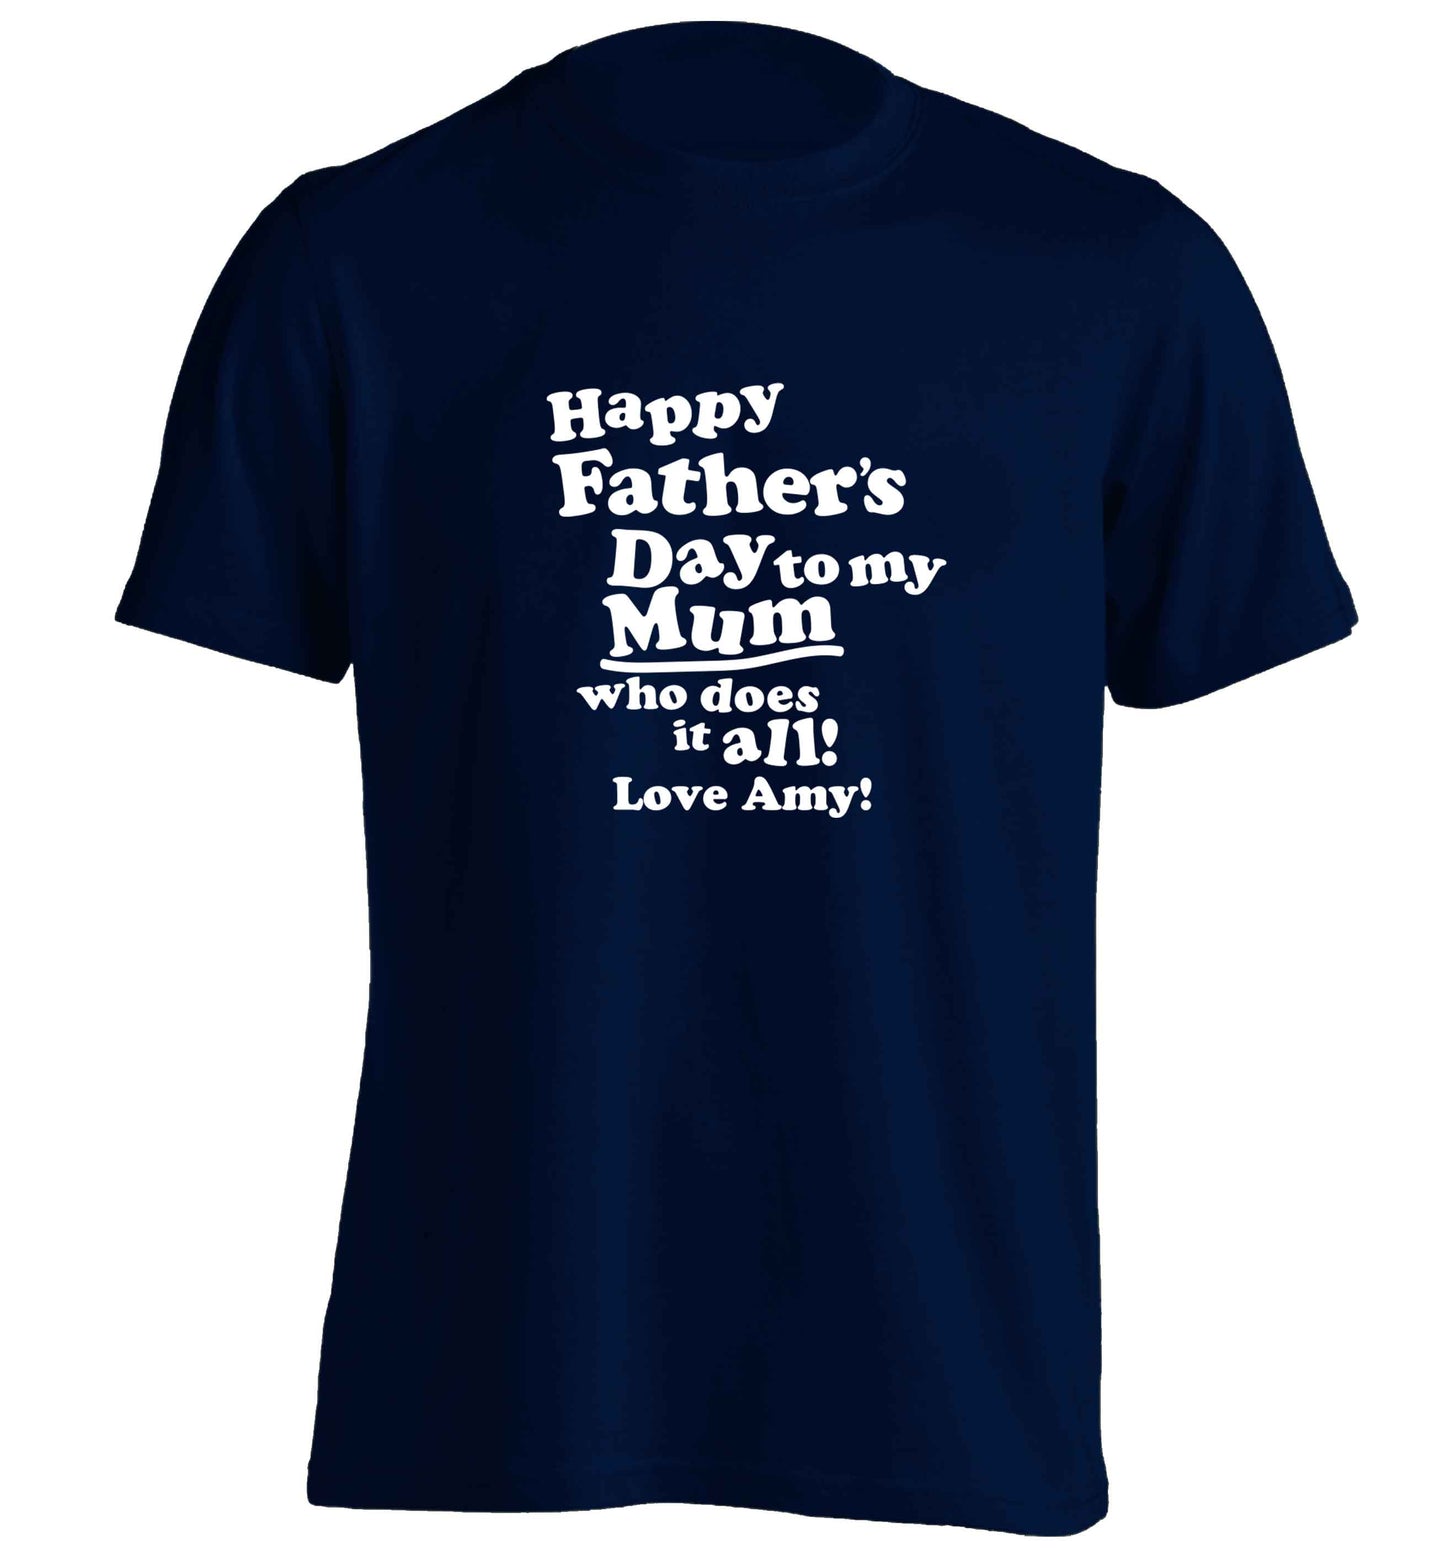 Happy Father's day to my mum who does it all adults unisex navy Tshirt 2XL